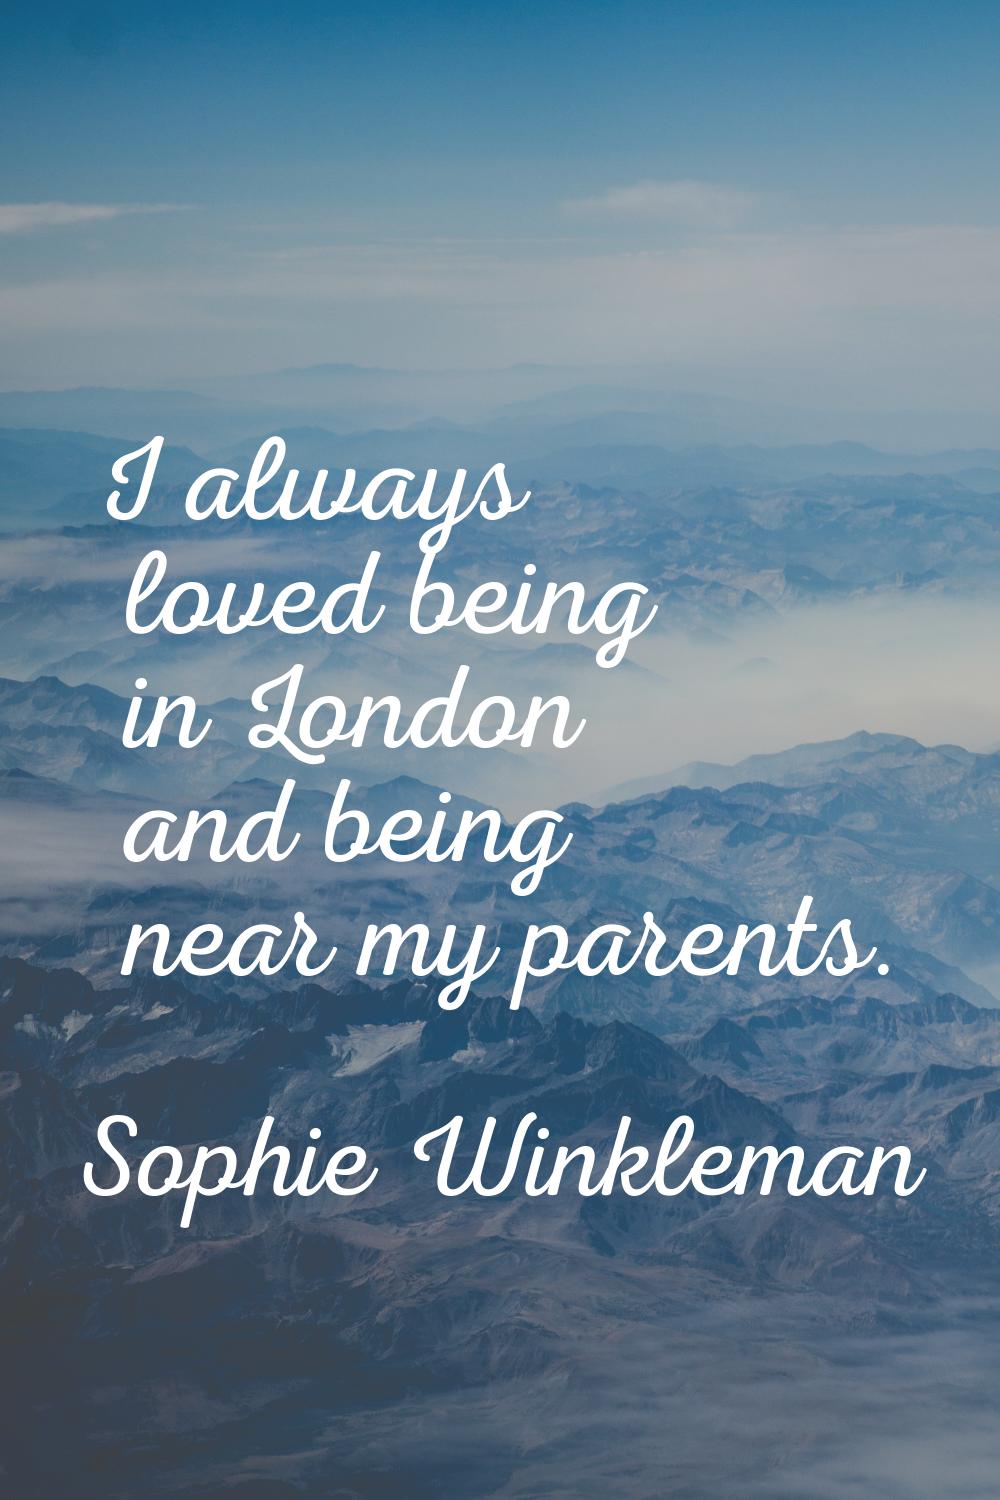 I always loved being in London and being near my parents.